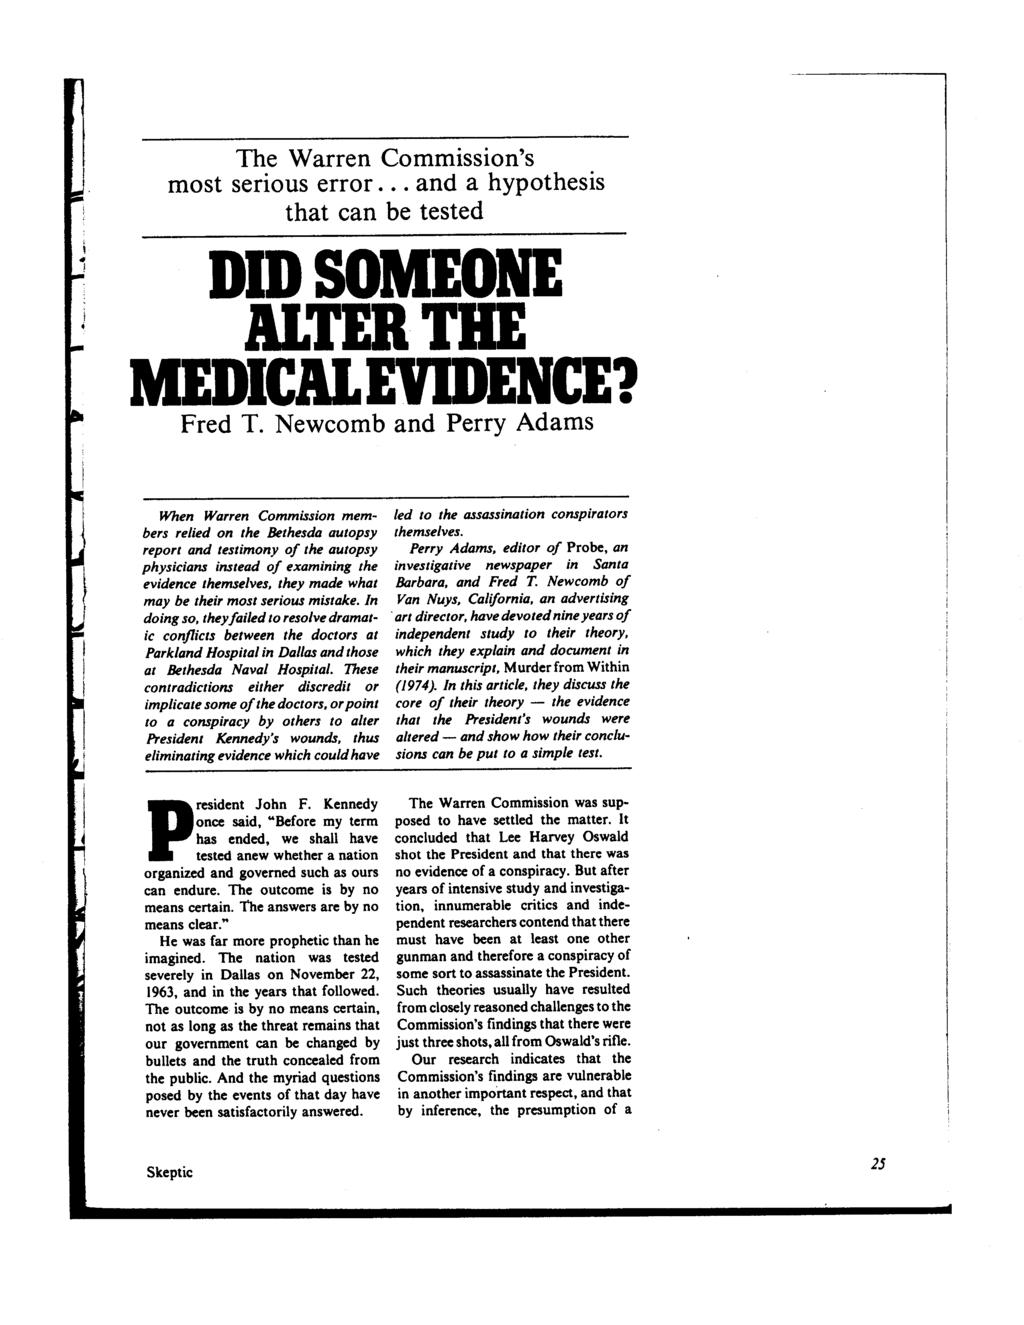 The Warren Commission's most serious error... and a hypothesis that can be tested DID SOMEONE ALTER THE MEDICAL EVIDENCE? Fred T.